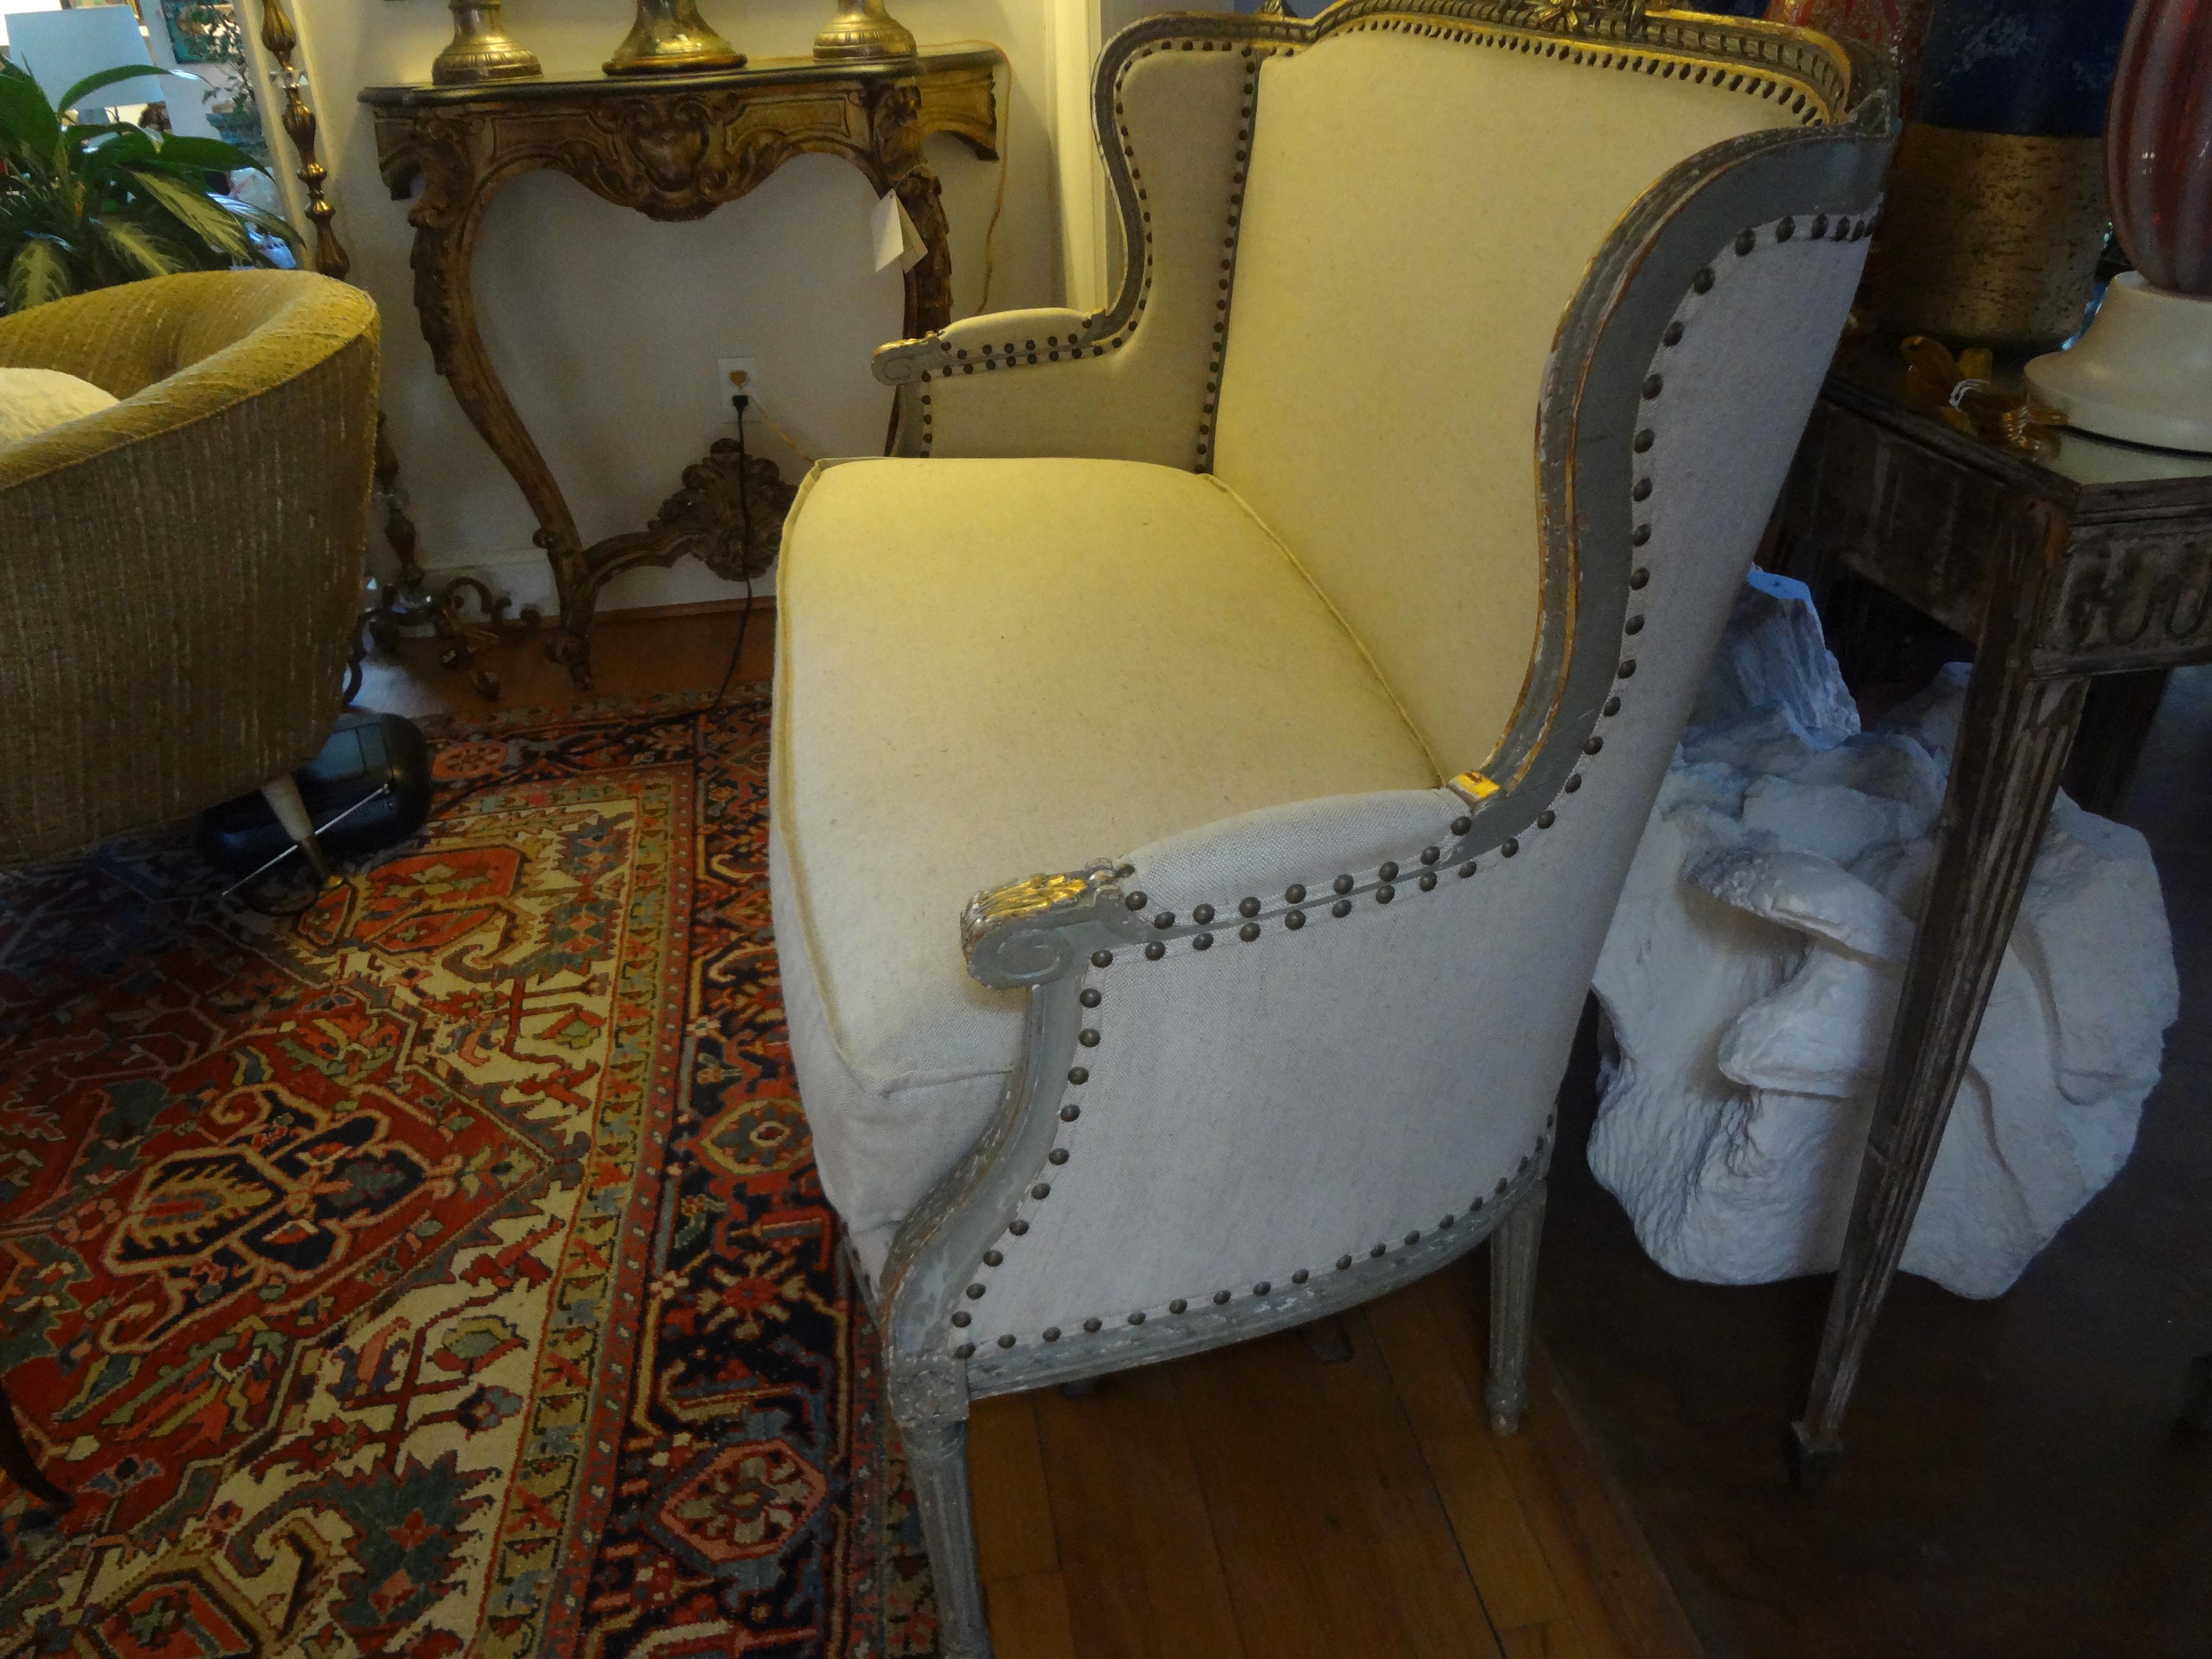 19th Century French Louis XVI Style Loveseat
Lovely antique French Louis XVI style painted and giltwood loveseat or canape. This stunning sofa is a beautiful gray color with gilt trim. This 19th century French Louis XVI style painted and gilt wood